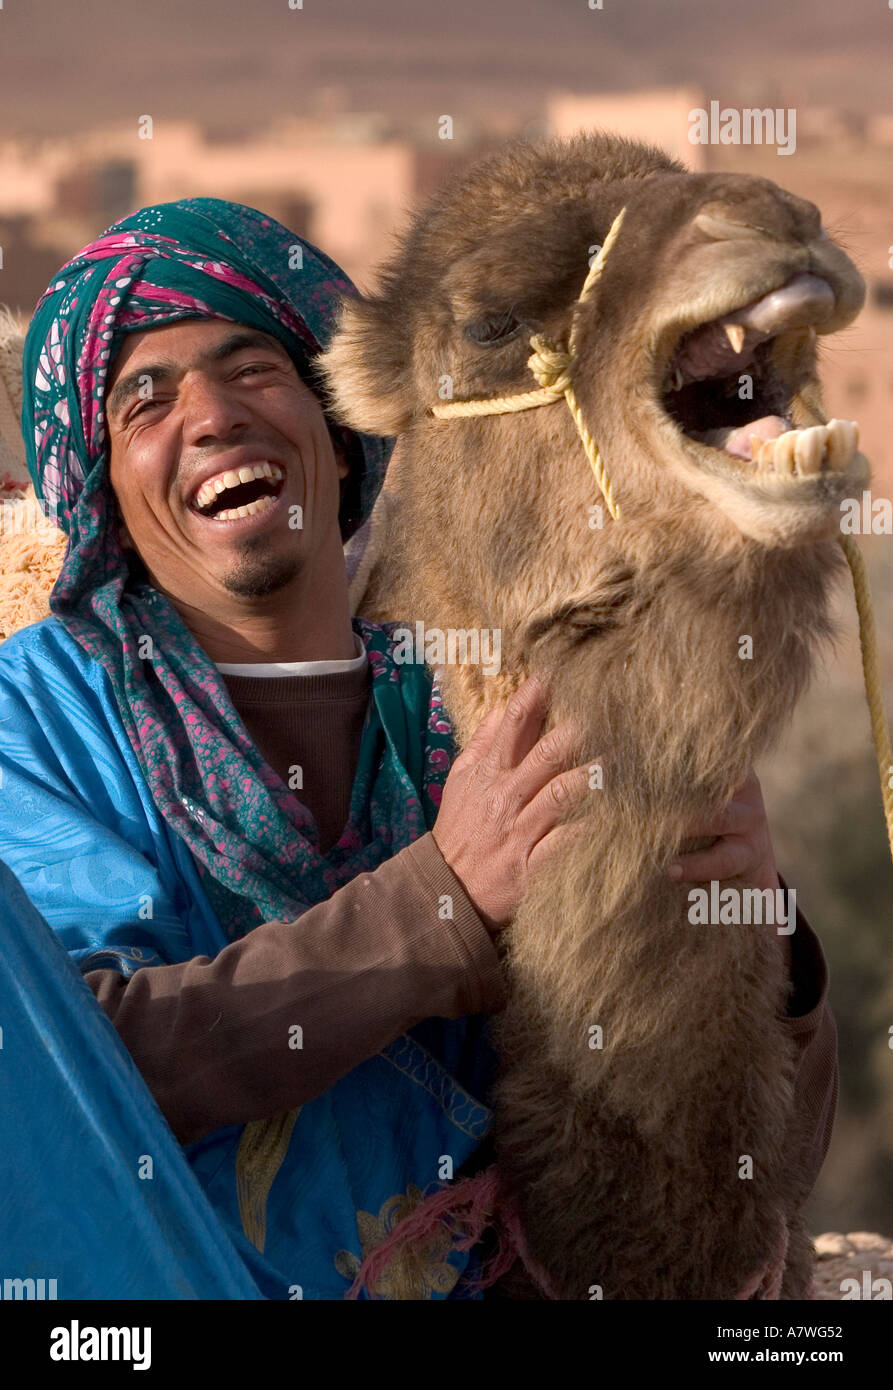 a-man-and-his-camel-laugh-as-they-sit-in